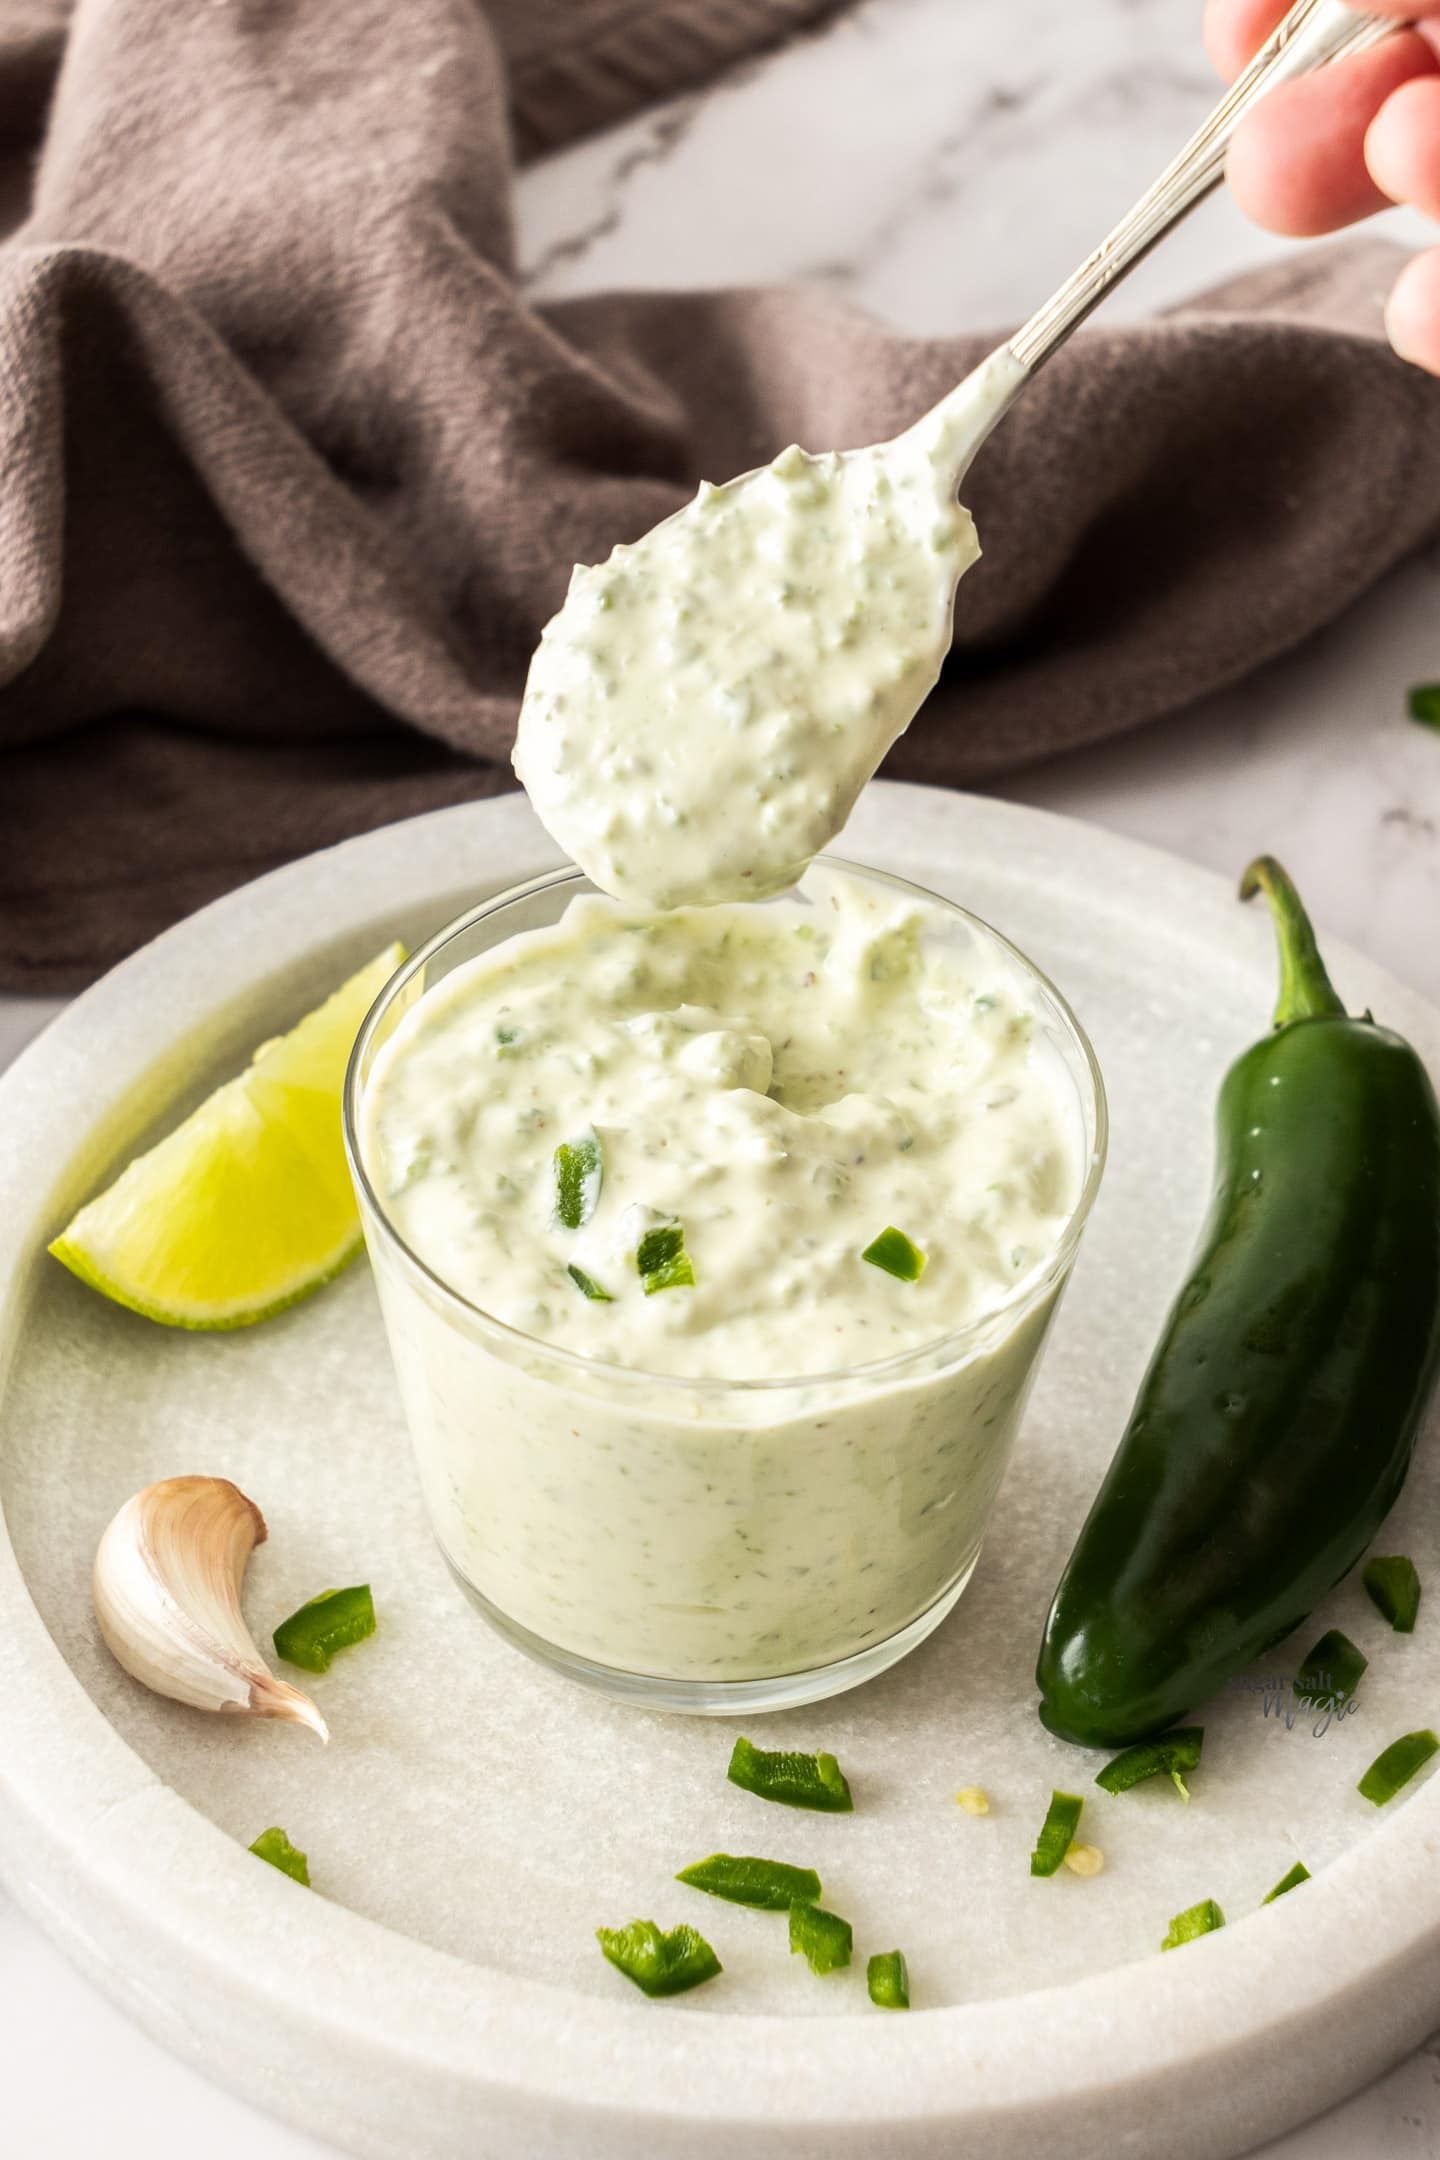 A spoon taking jalapeno mayo out of a glass.